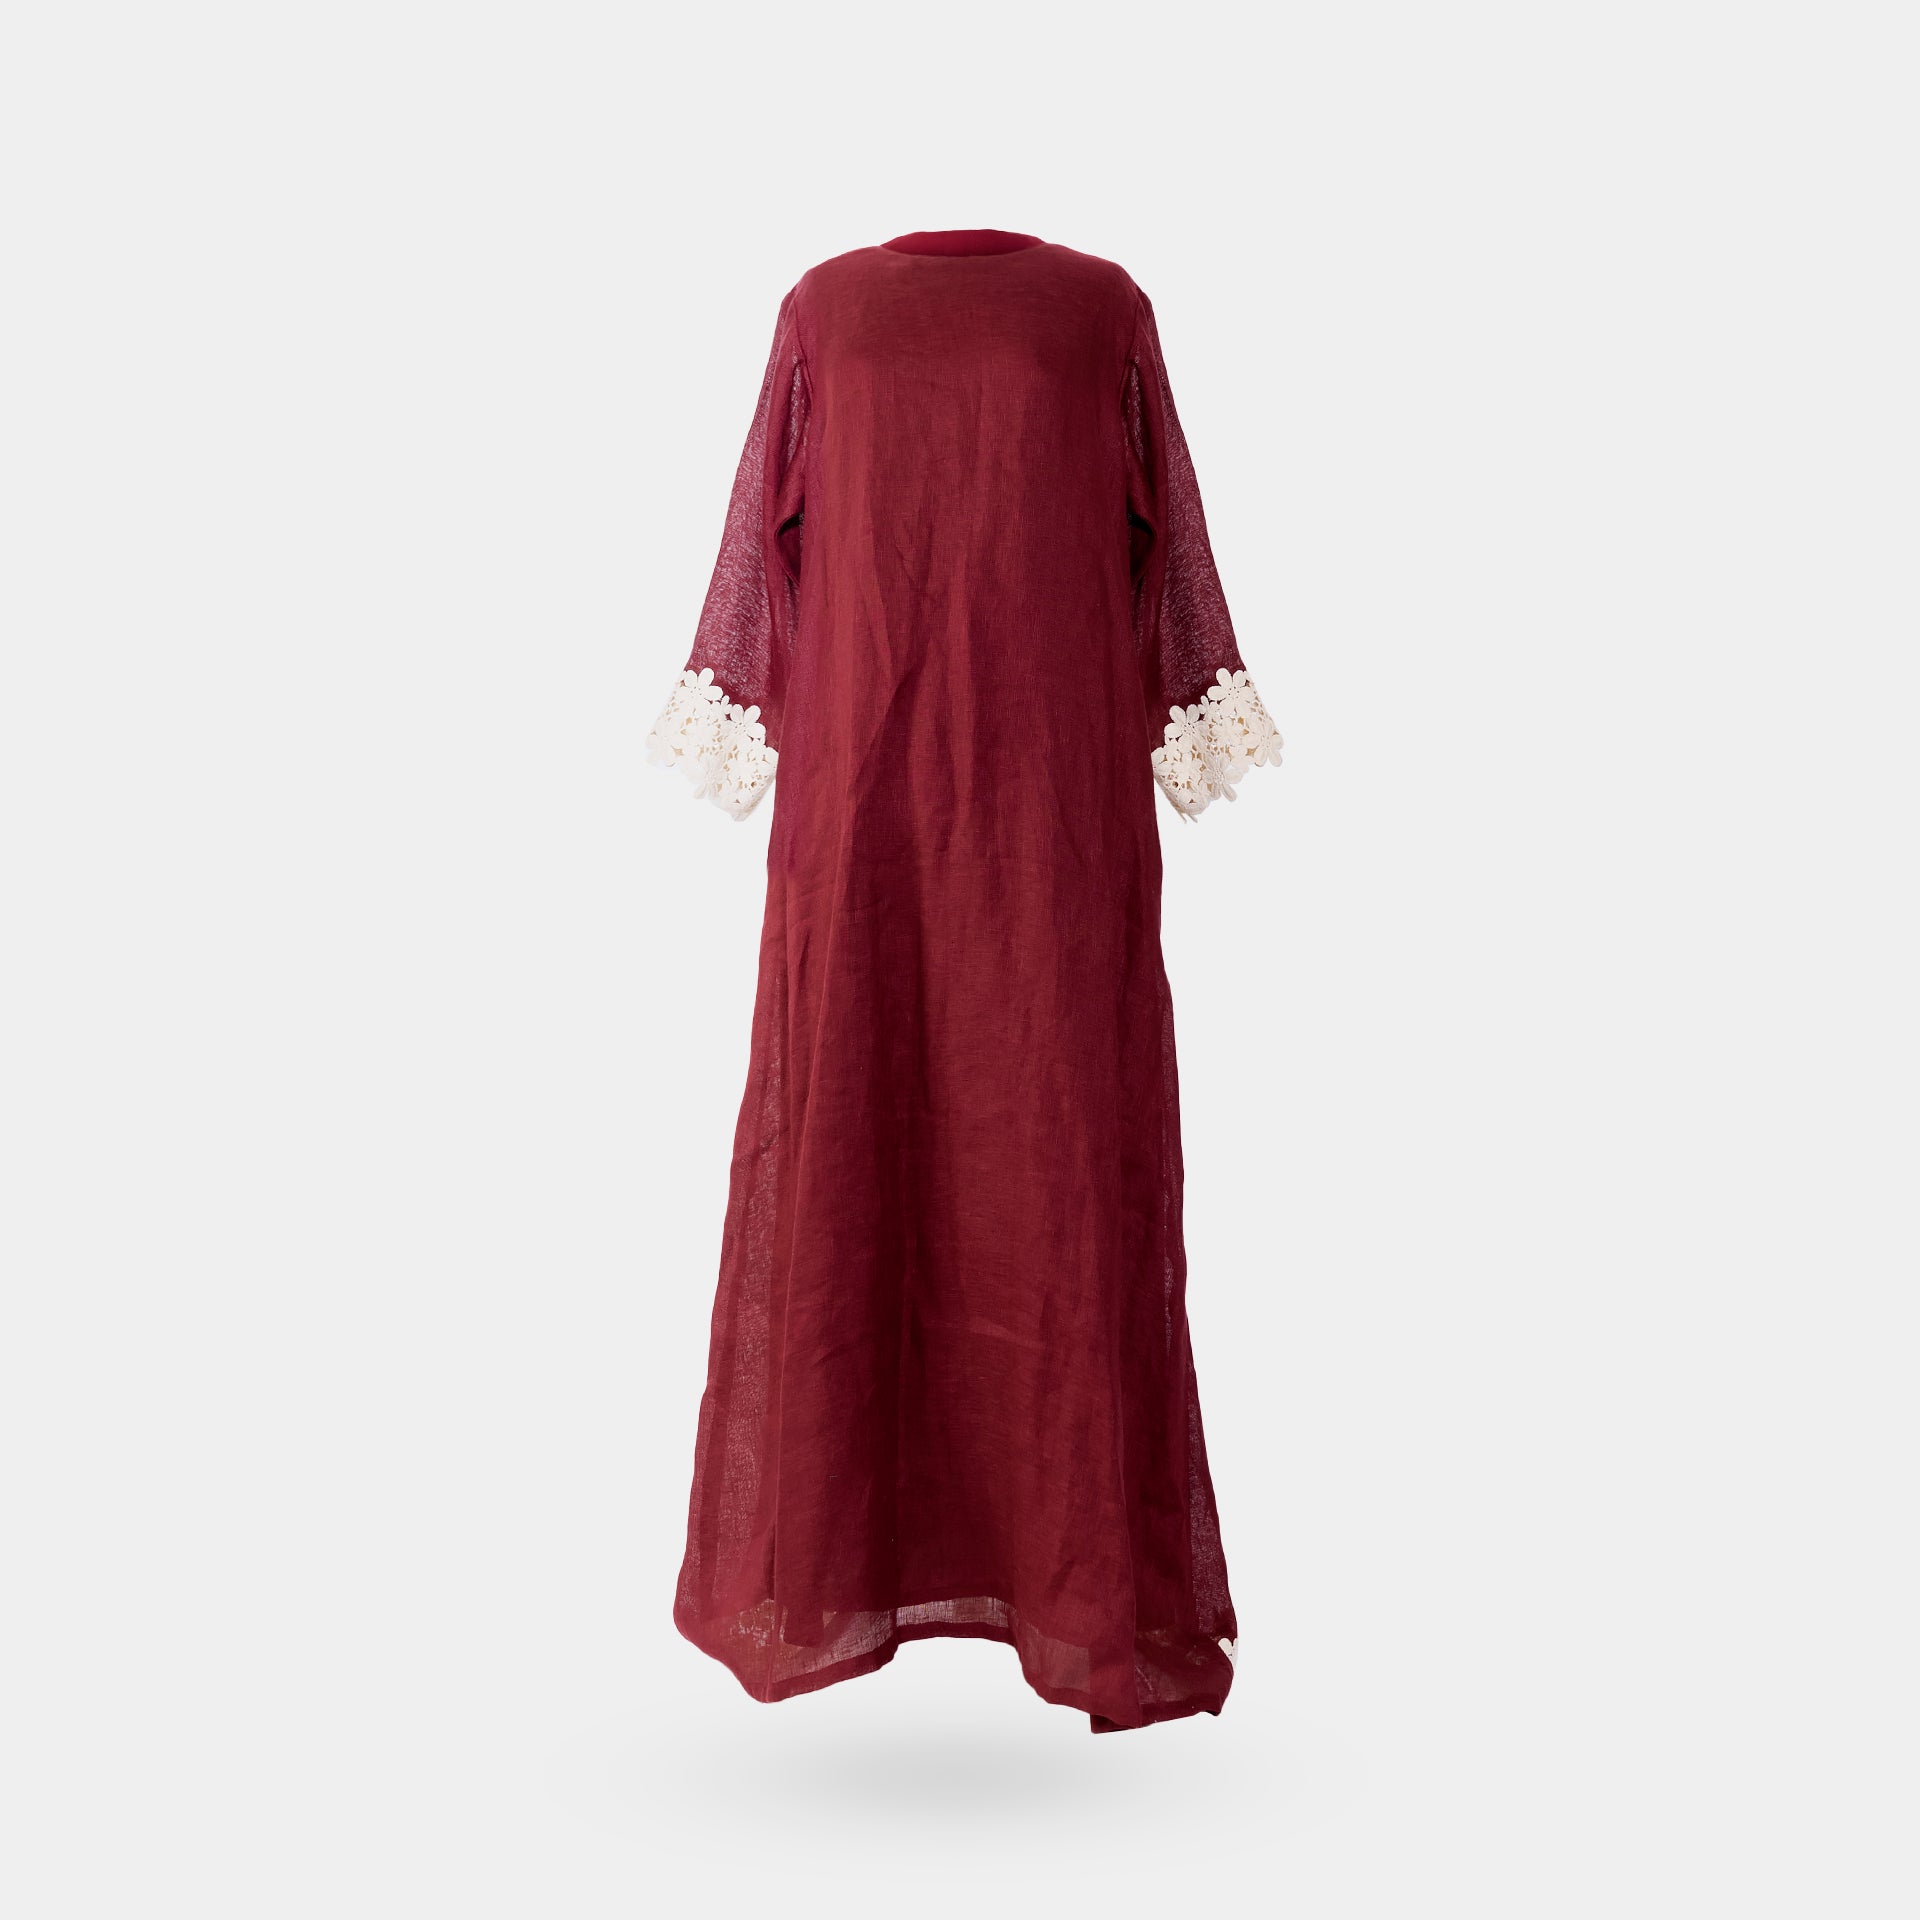 Maroon Long Dress with Beige Joubert on the Ends of the Sleeves From Darzah